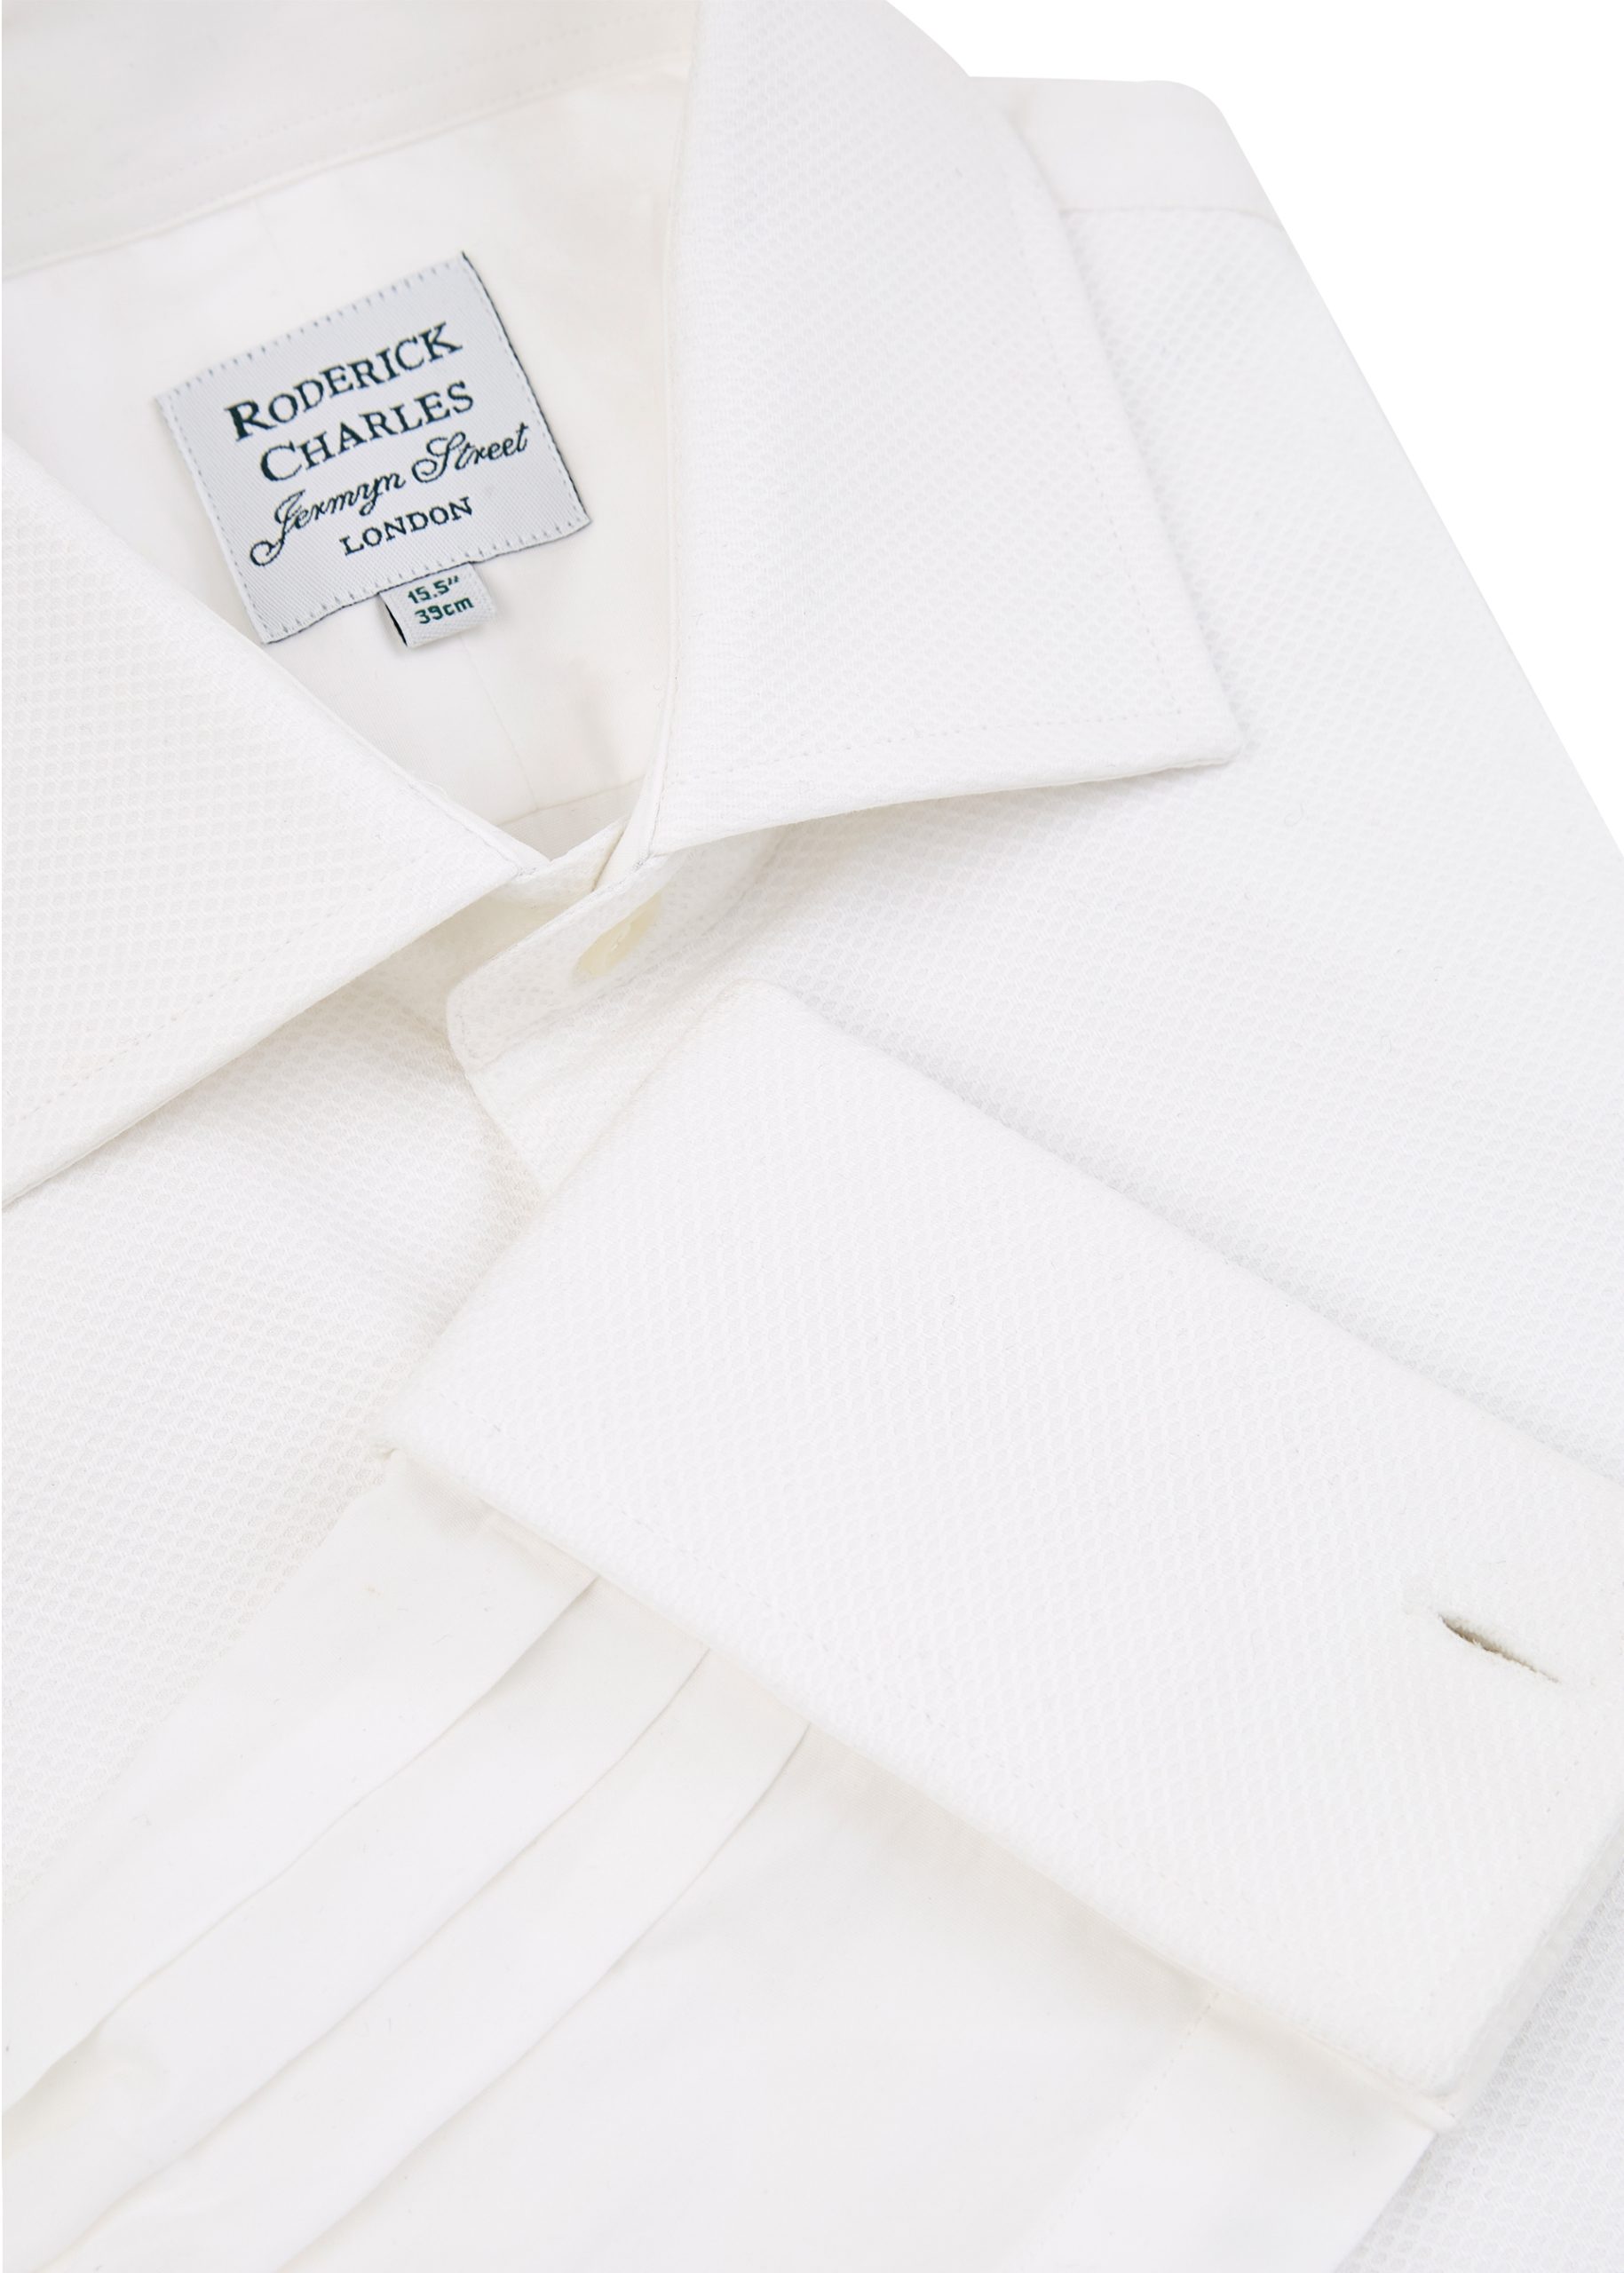 Roderick Charles double cuff marcella dress shirt for formal occasions